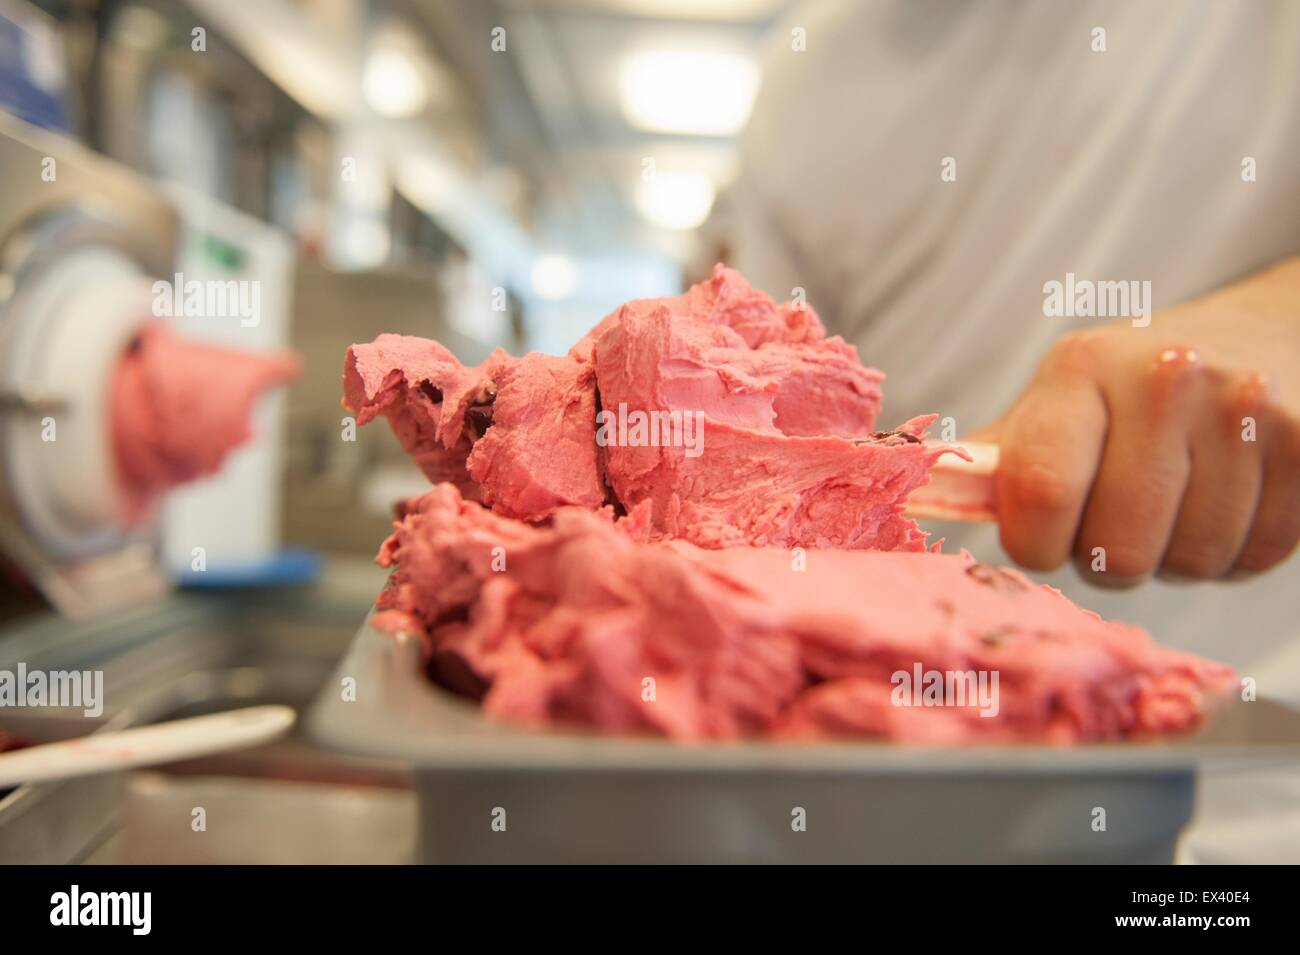 Berlin, Germany. 01st July, 2015. An employee fills a cooling container with cherry ice cream at ice cream manufacturer Florida Eis in Berlin, Germany, 01 July 2015. Around 200 employees are involved in the production and selling of about 80 different kinds of ice cream. Photo: Paul Zinken/dpa/Alamy Live News Stock Photo